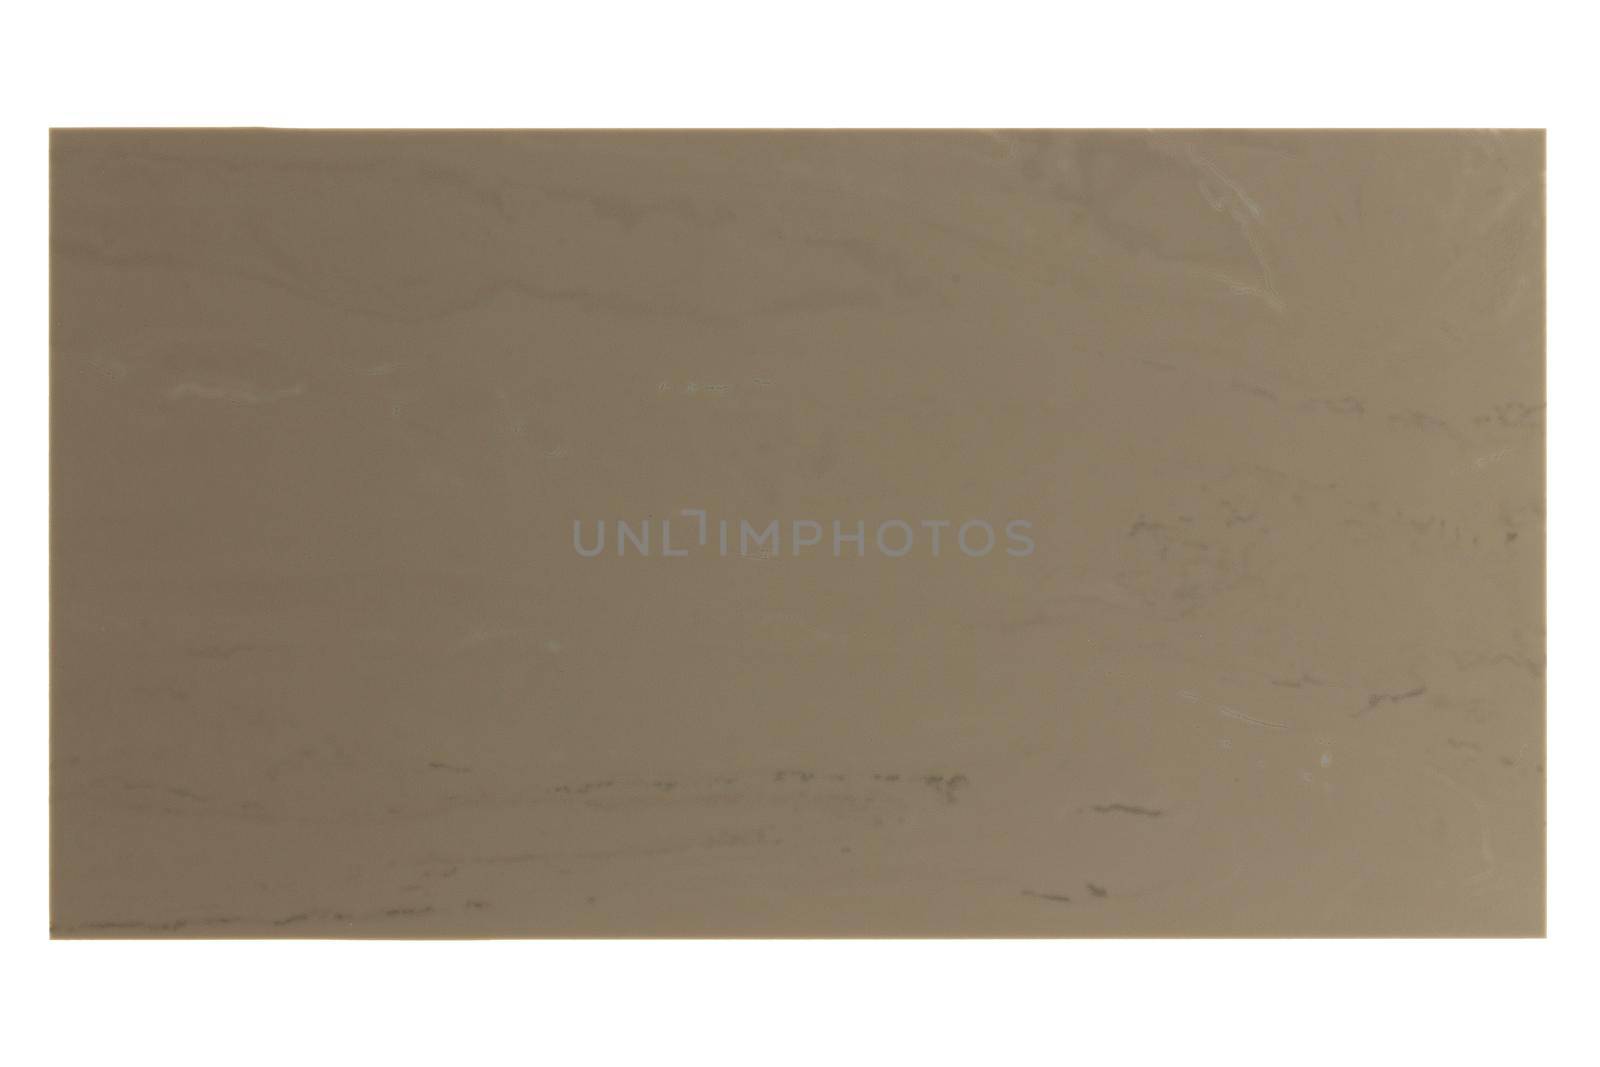 Sample of artificial stone isolated on a white background. Top view.